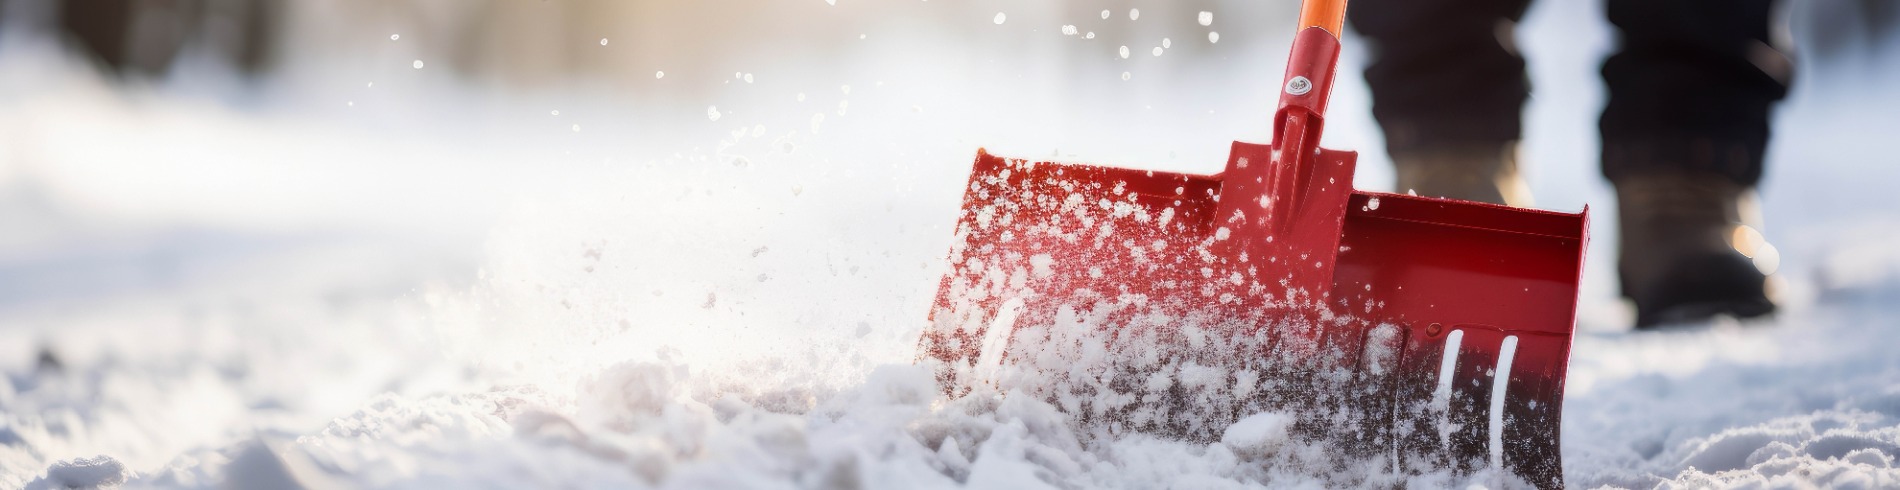 Zoomed in shot of person clearing snow with red shovel